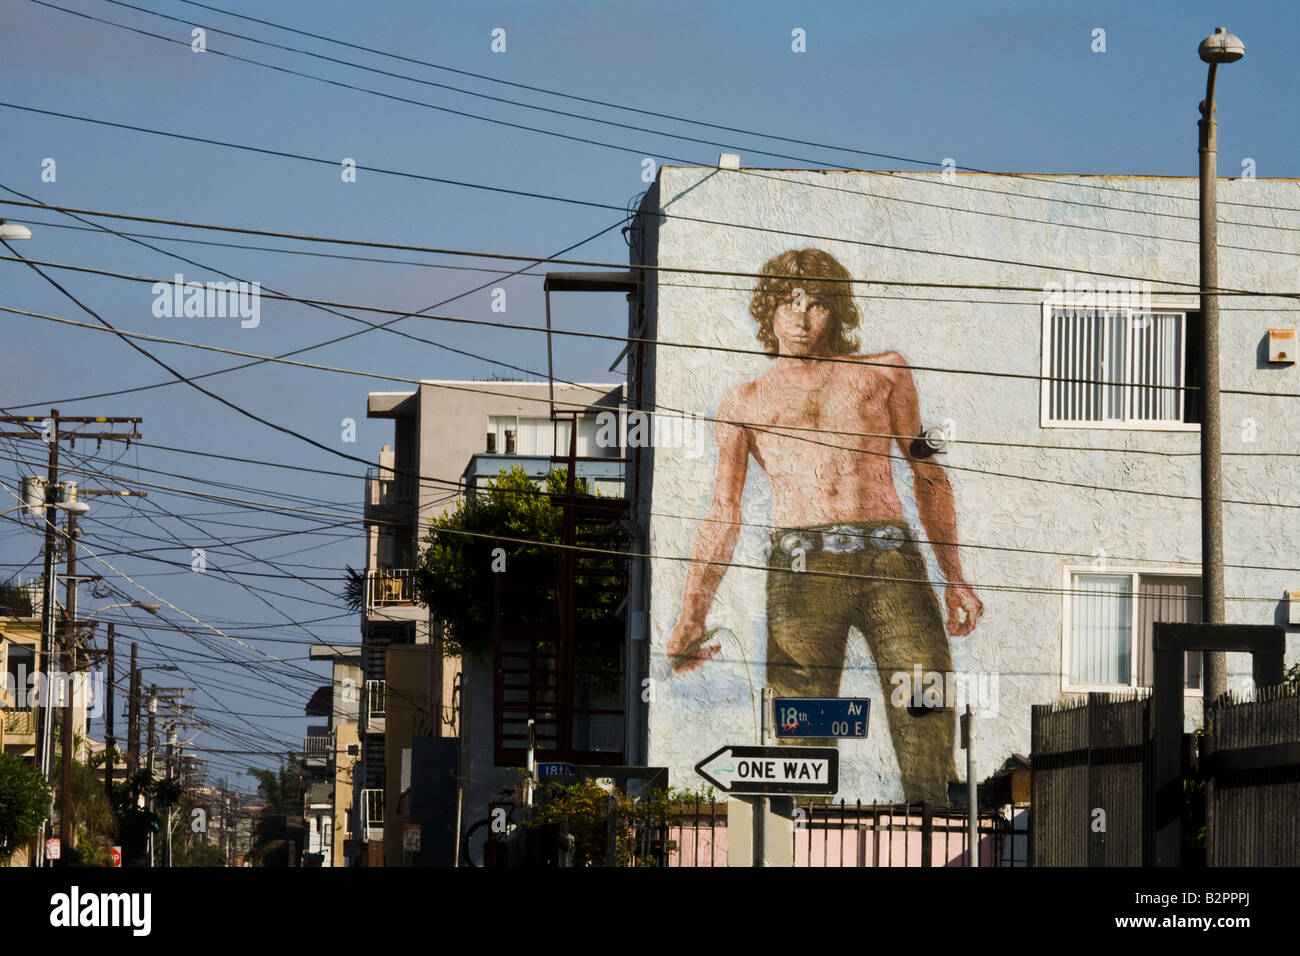 Jim Morrison Doors Mural and Phone and Power Lines Venice Beach Los Angeles County California United States of America Stock Photo